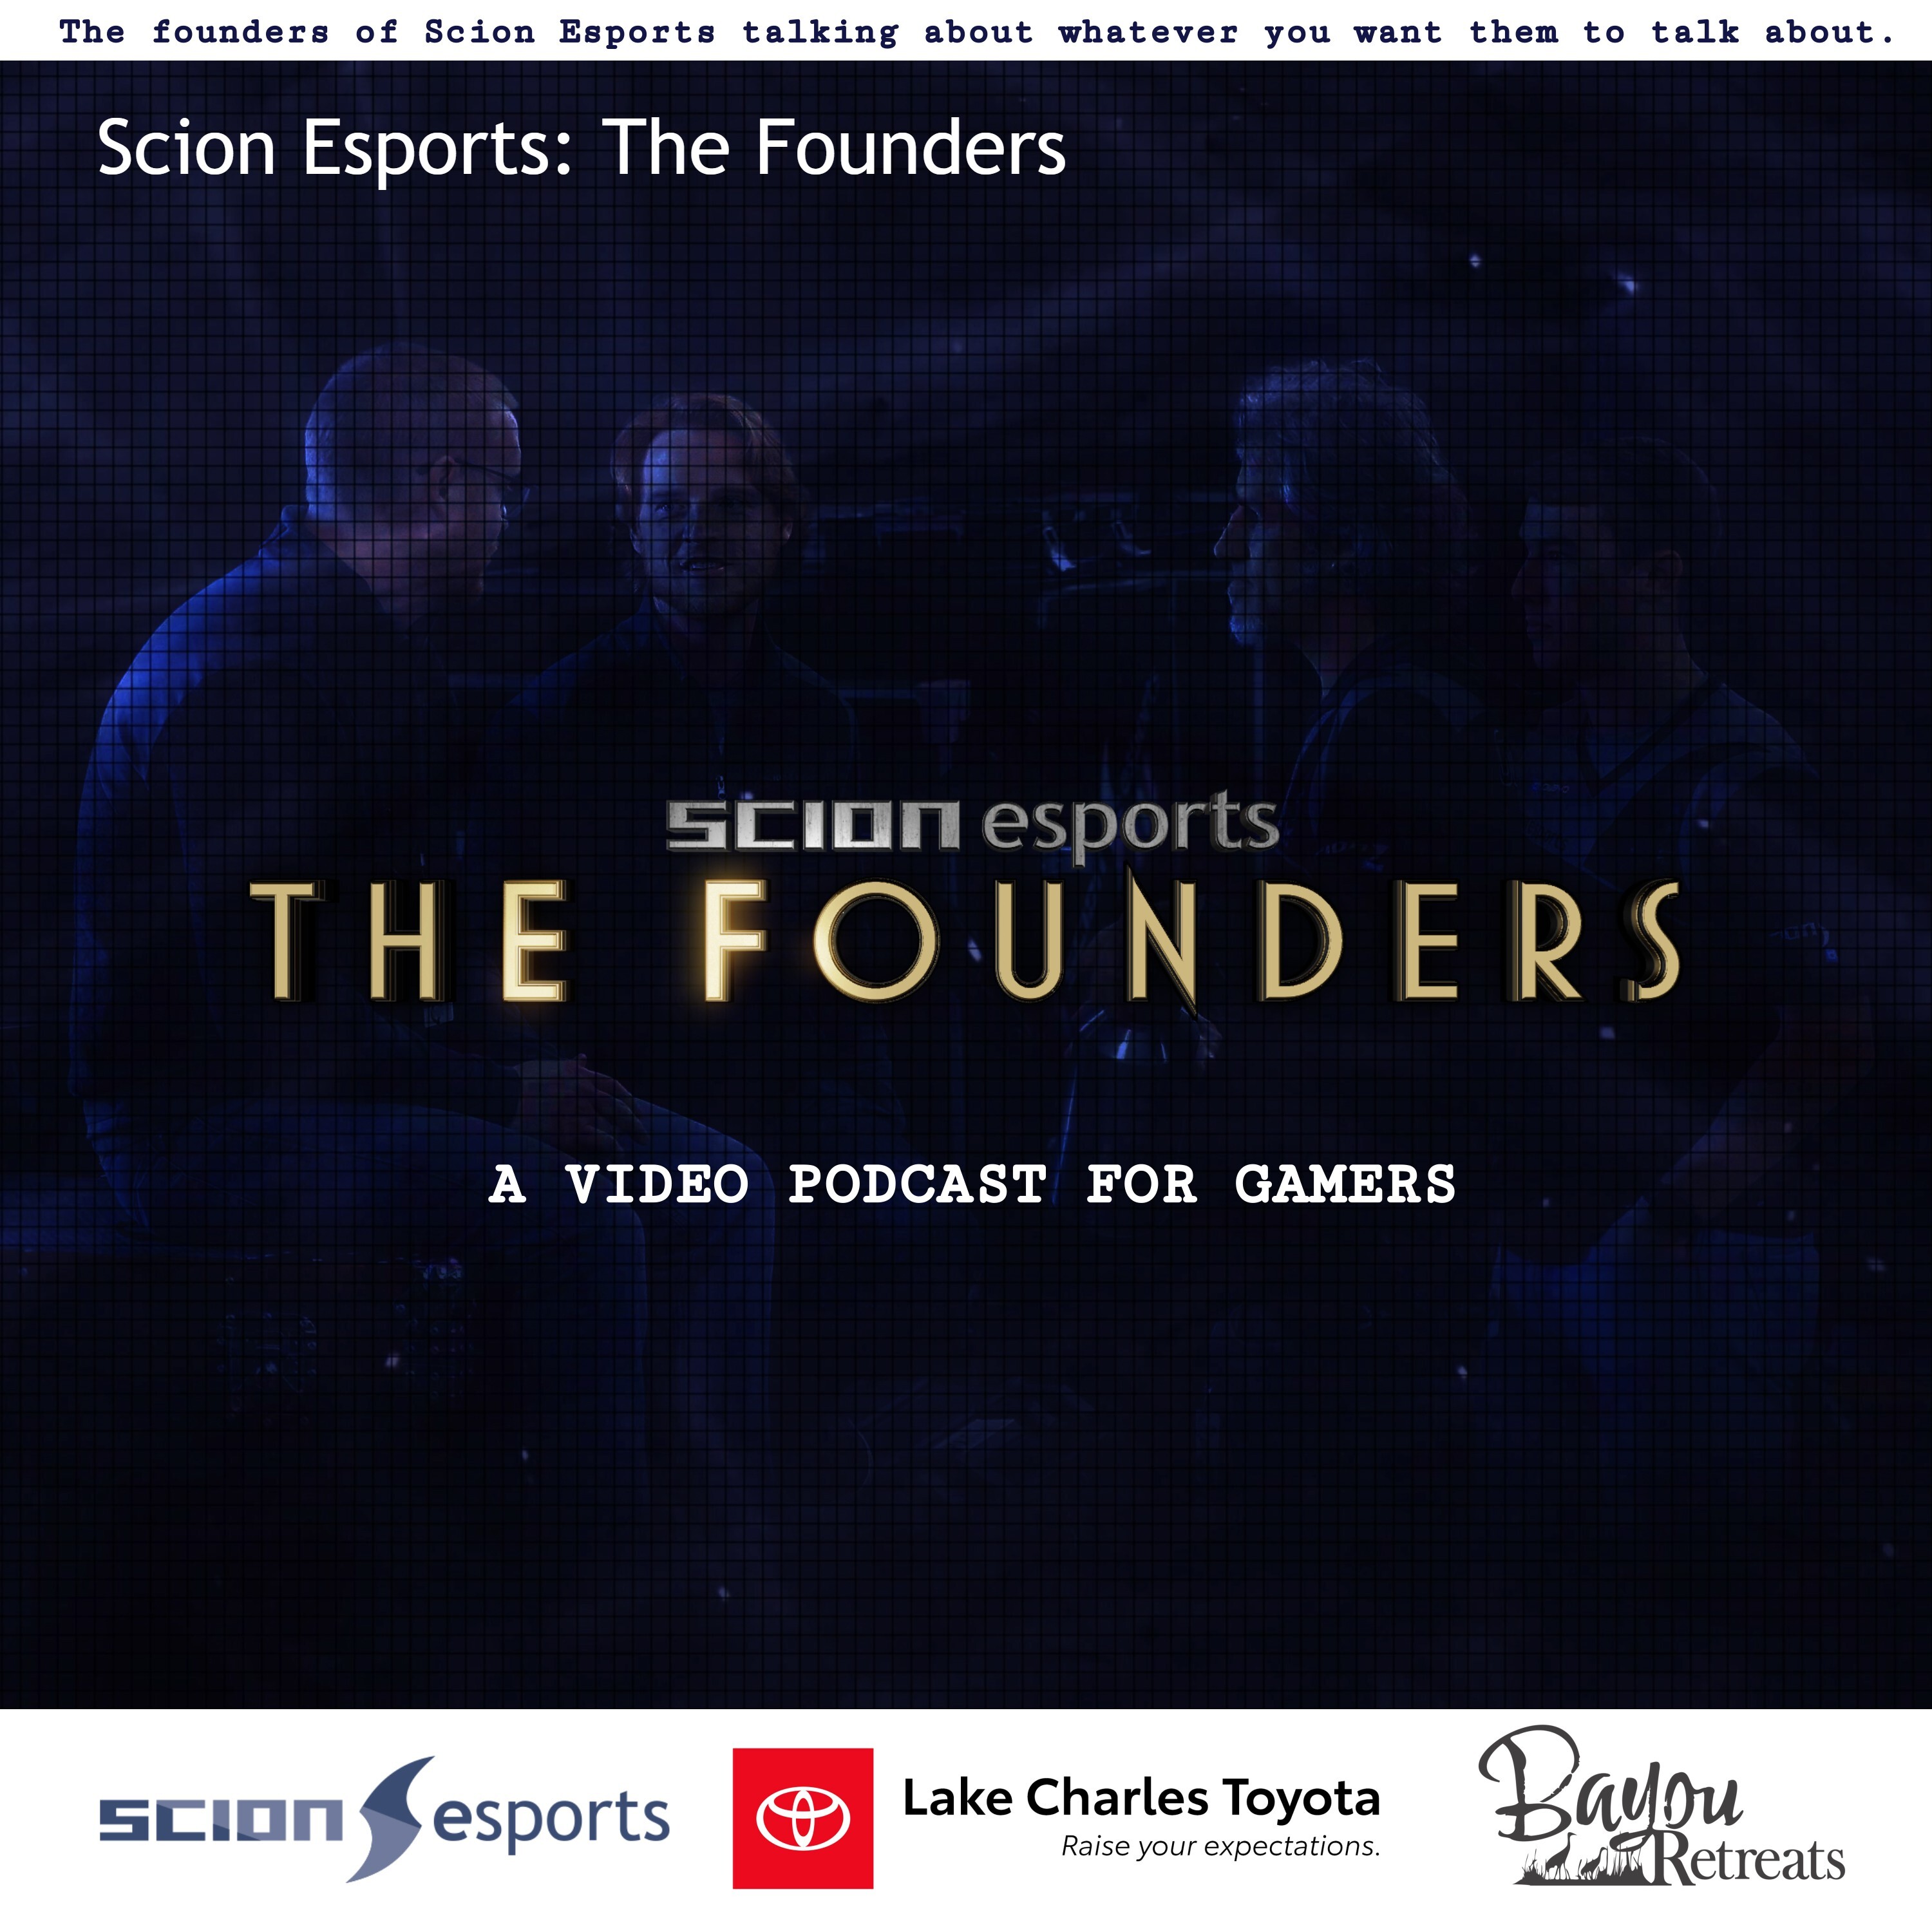 Scion Esports: The Founders Video Podcast